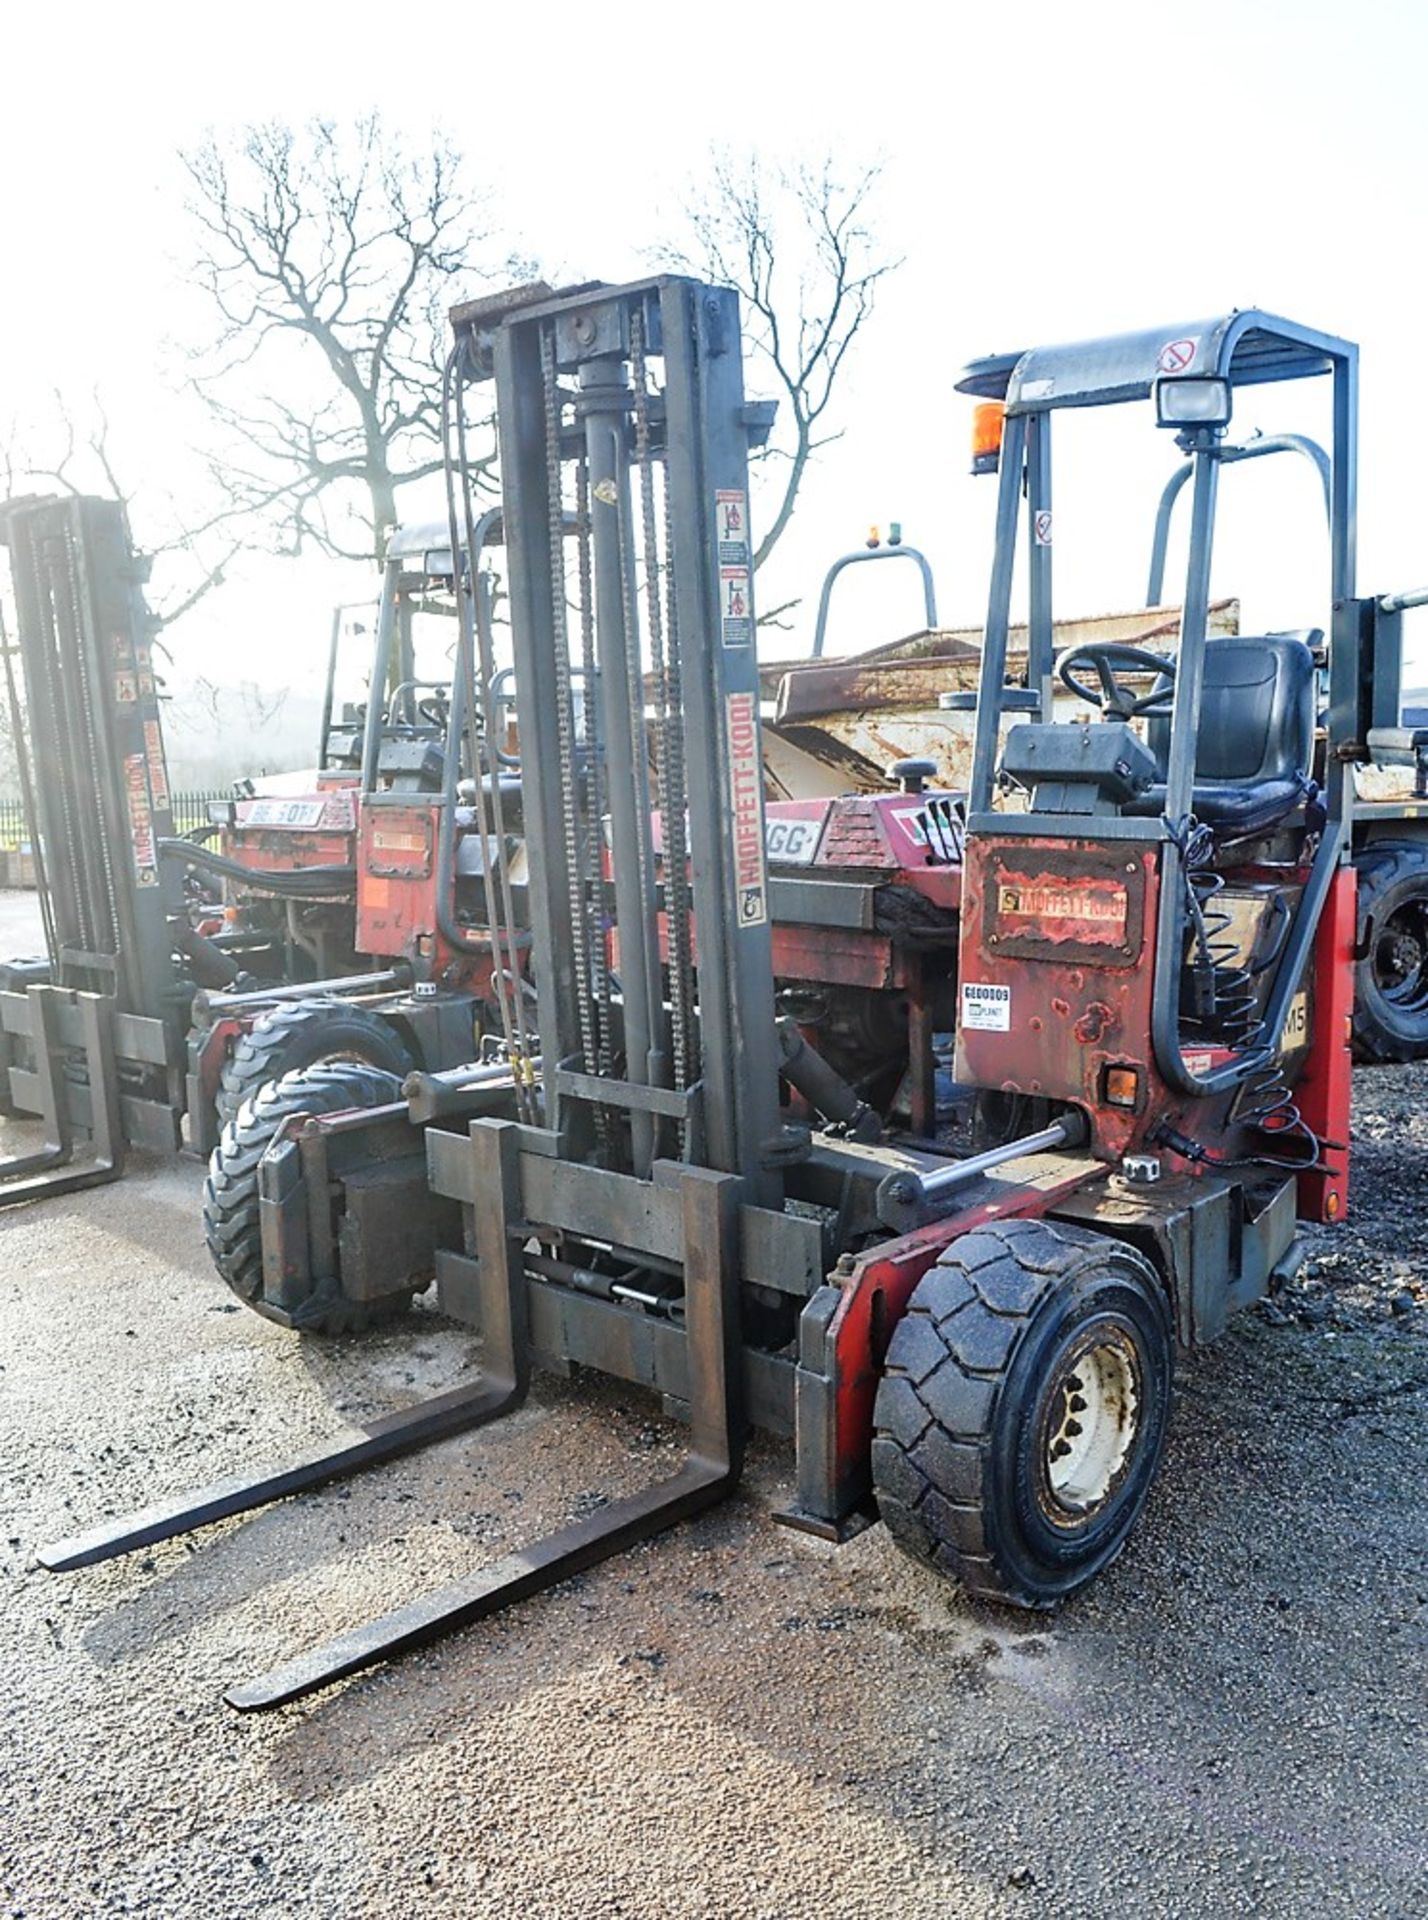 Moffet M5 20.3 diesel driven truck mountable fork lift truck Year: 2005 S/N: E030205 Recorded Hours: